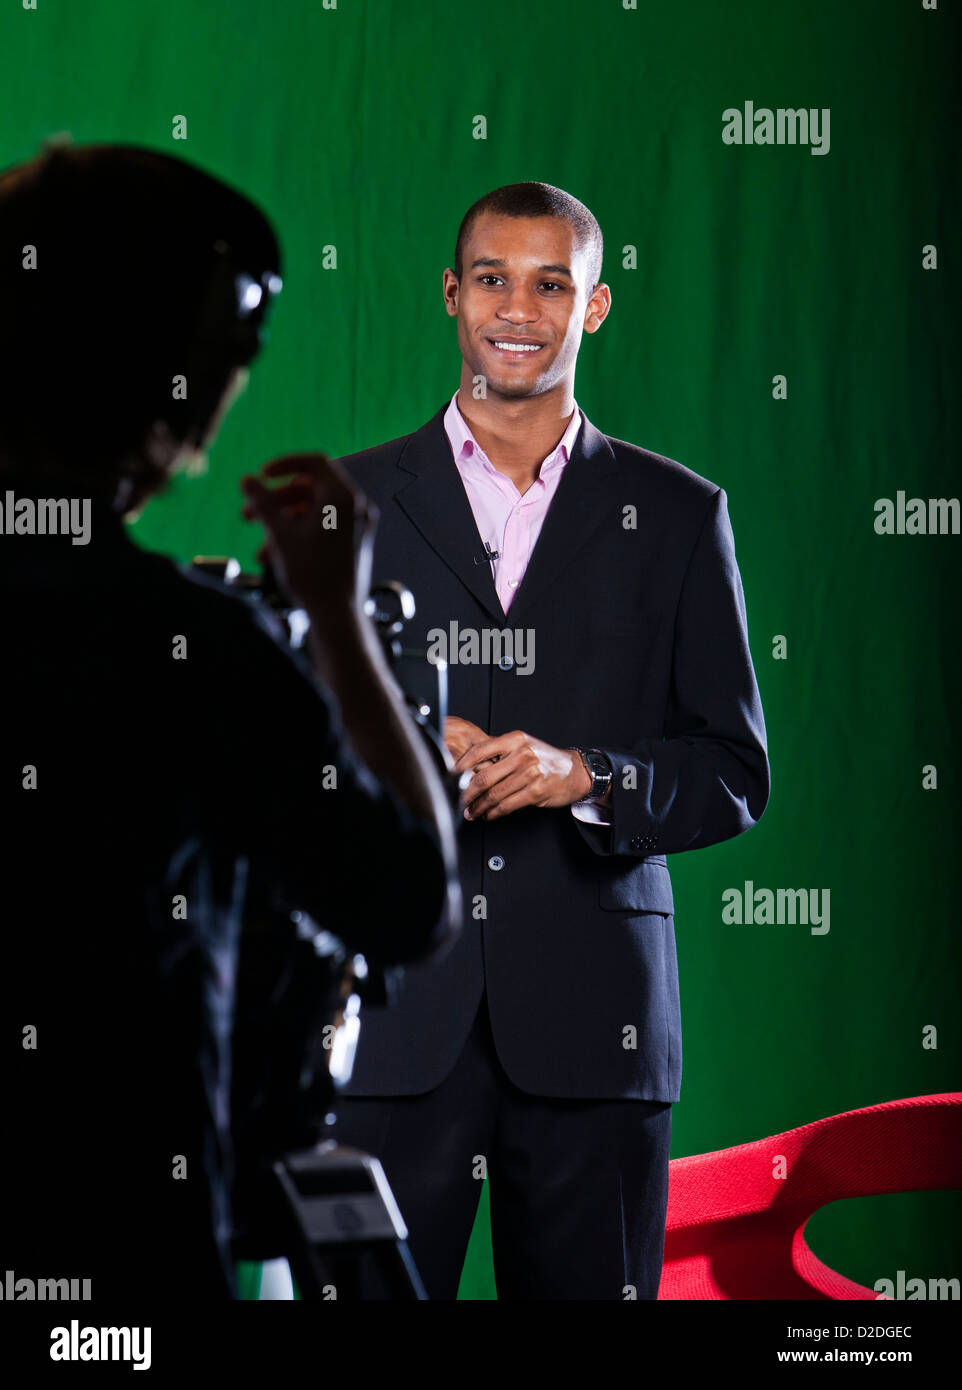 Presenter in a green screen Television studio chats with a camera operator silhouetted in foreground. Stock Photo